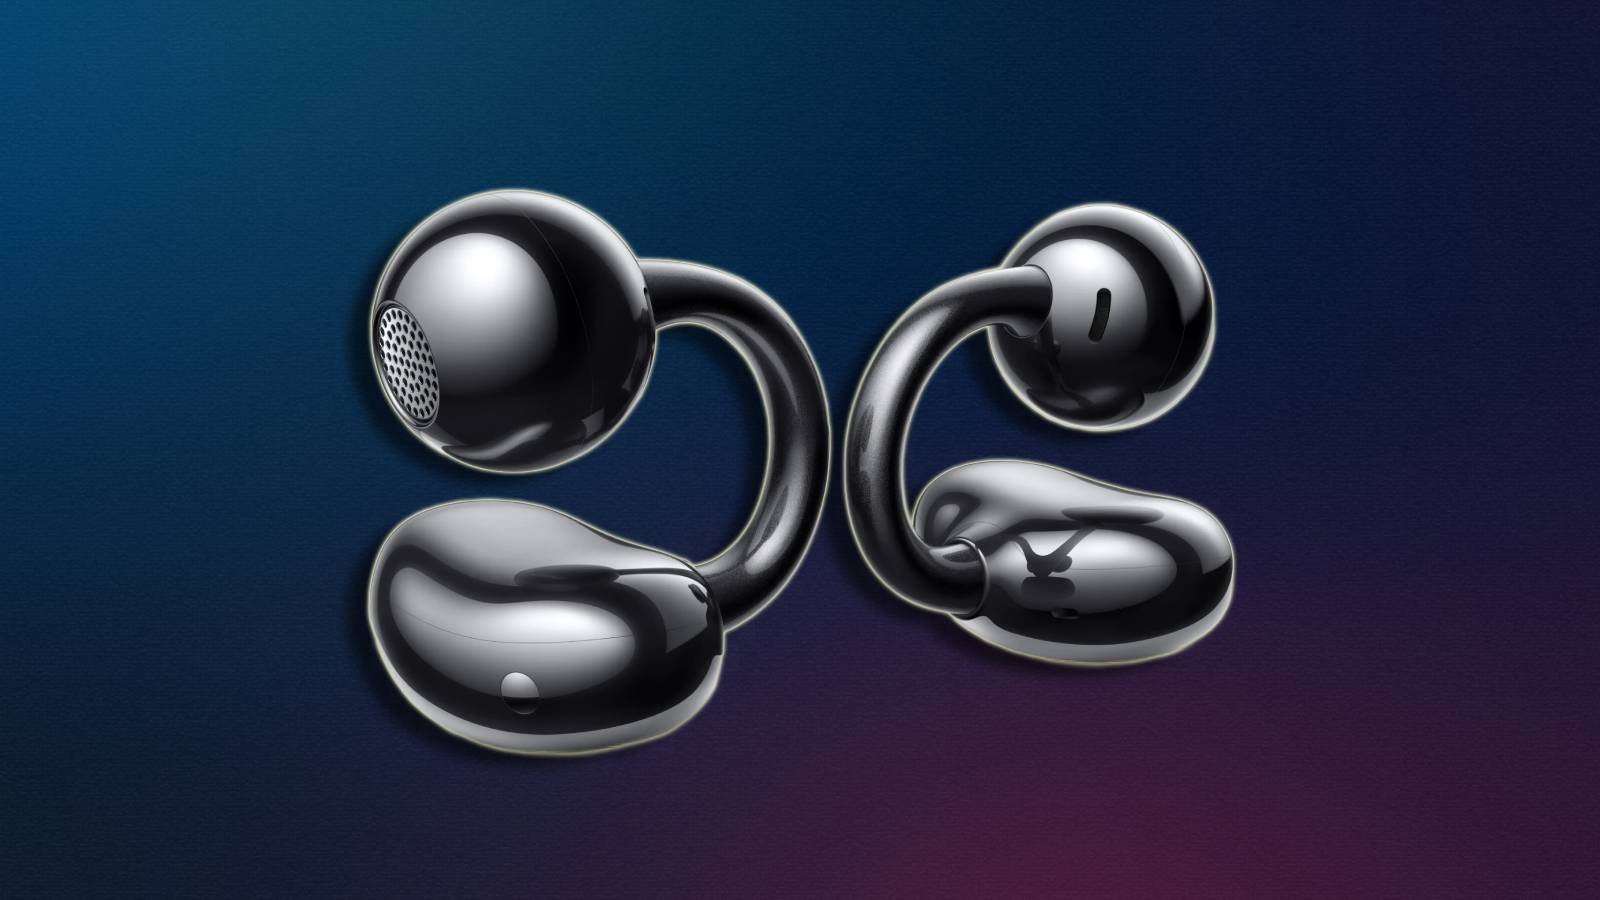 HUAWEI FreeClip launched: Ever seen earbuds like these before